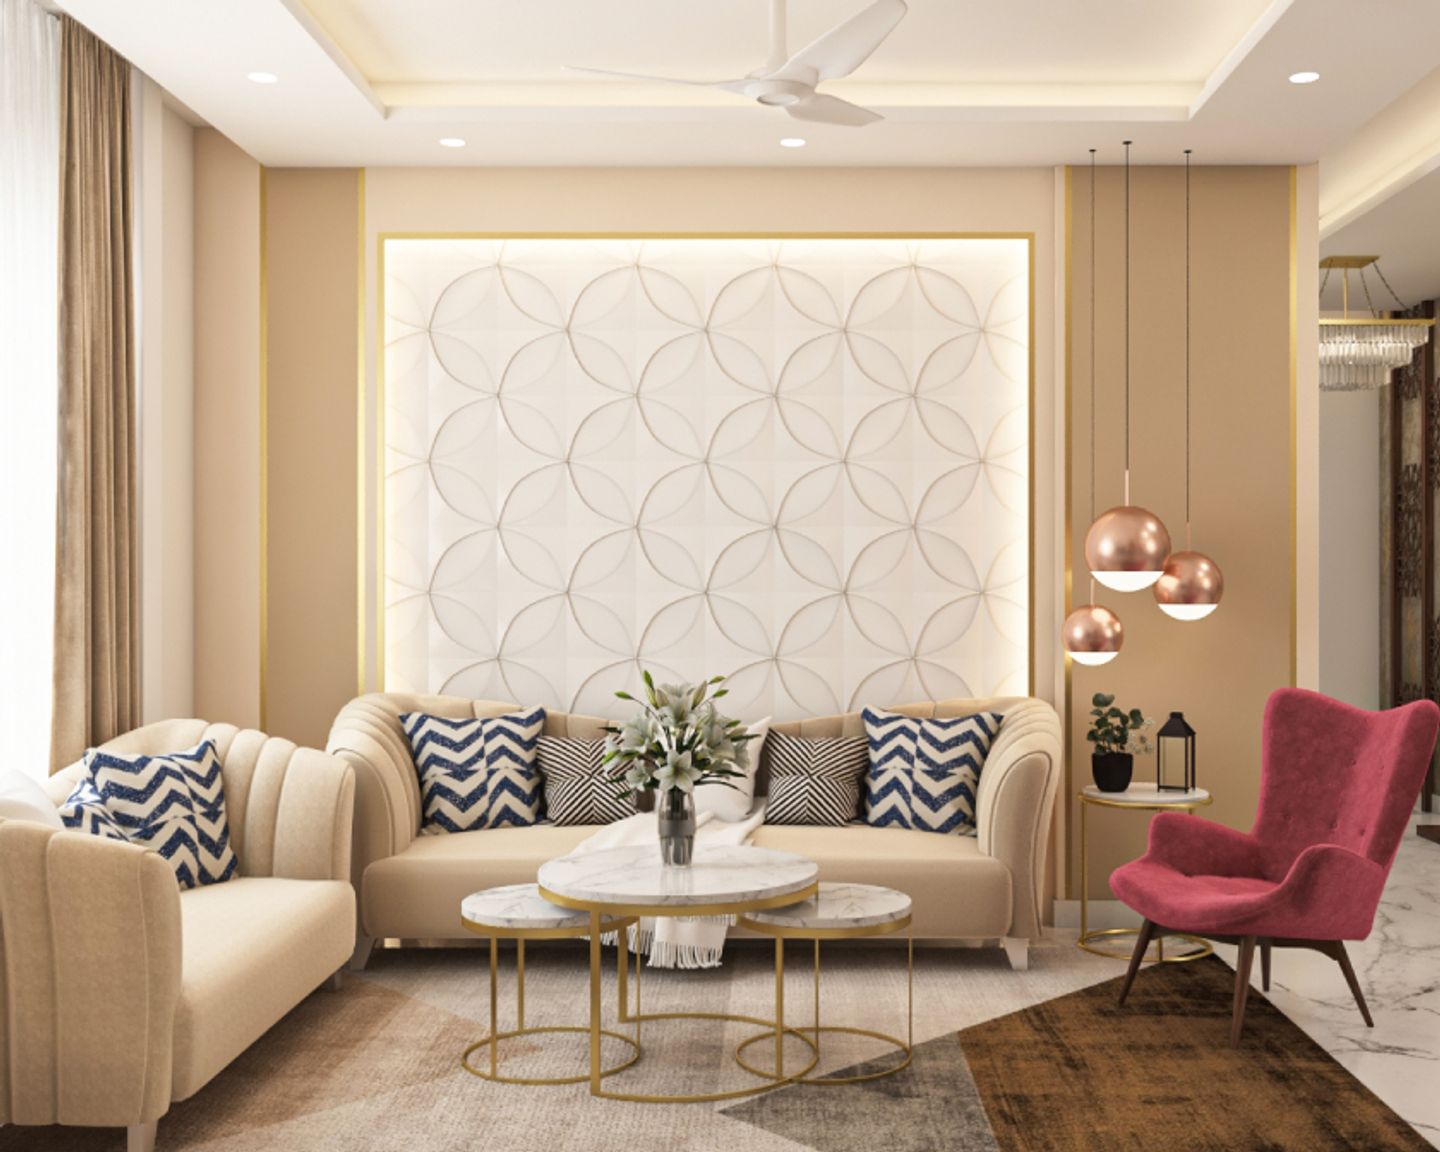 Beige Accent Wall Design With A Partition - Livspace